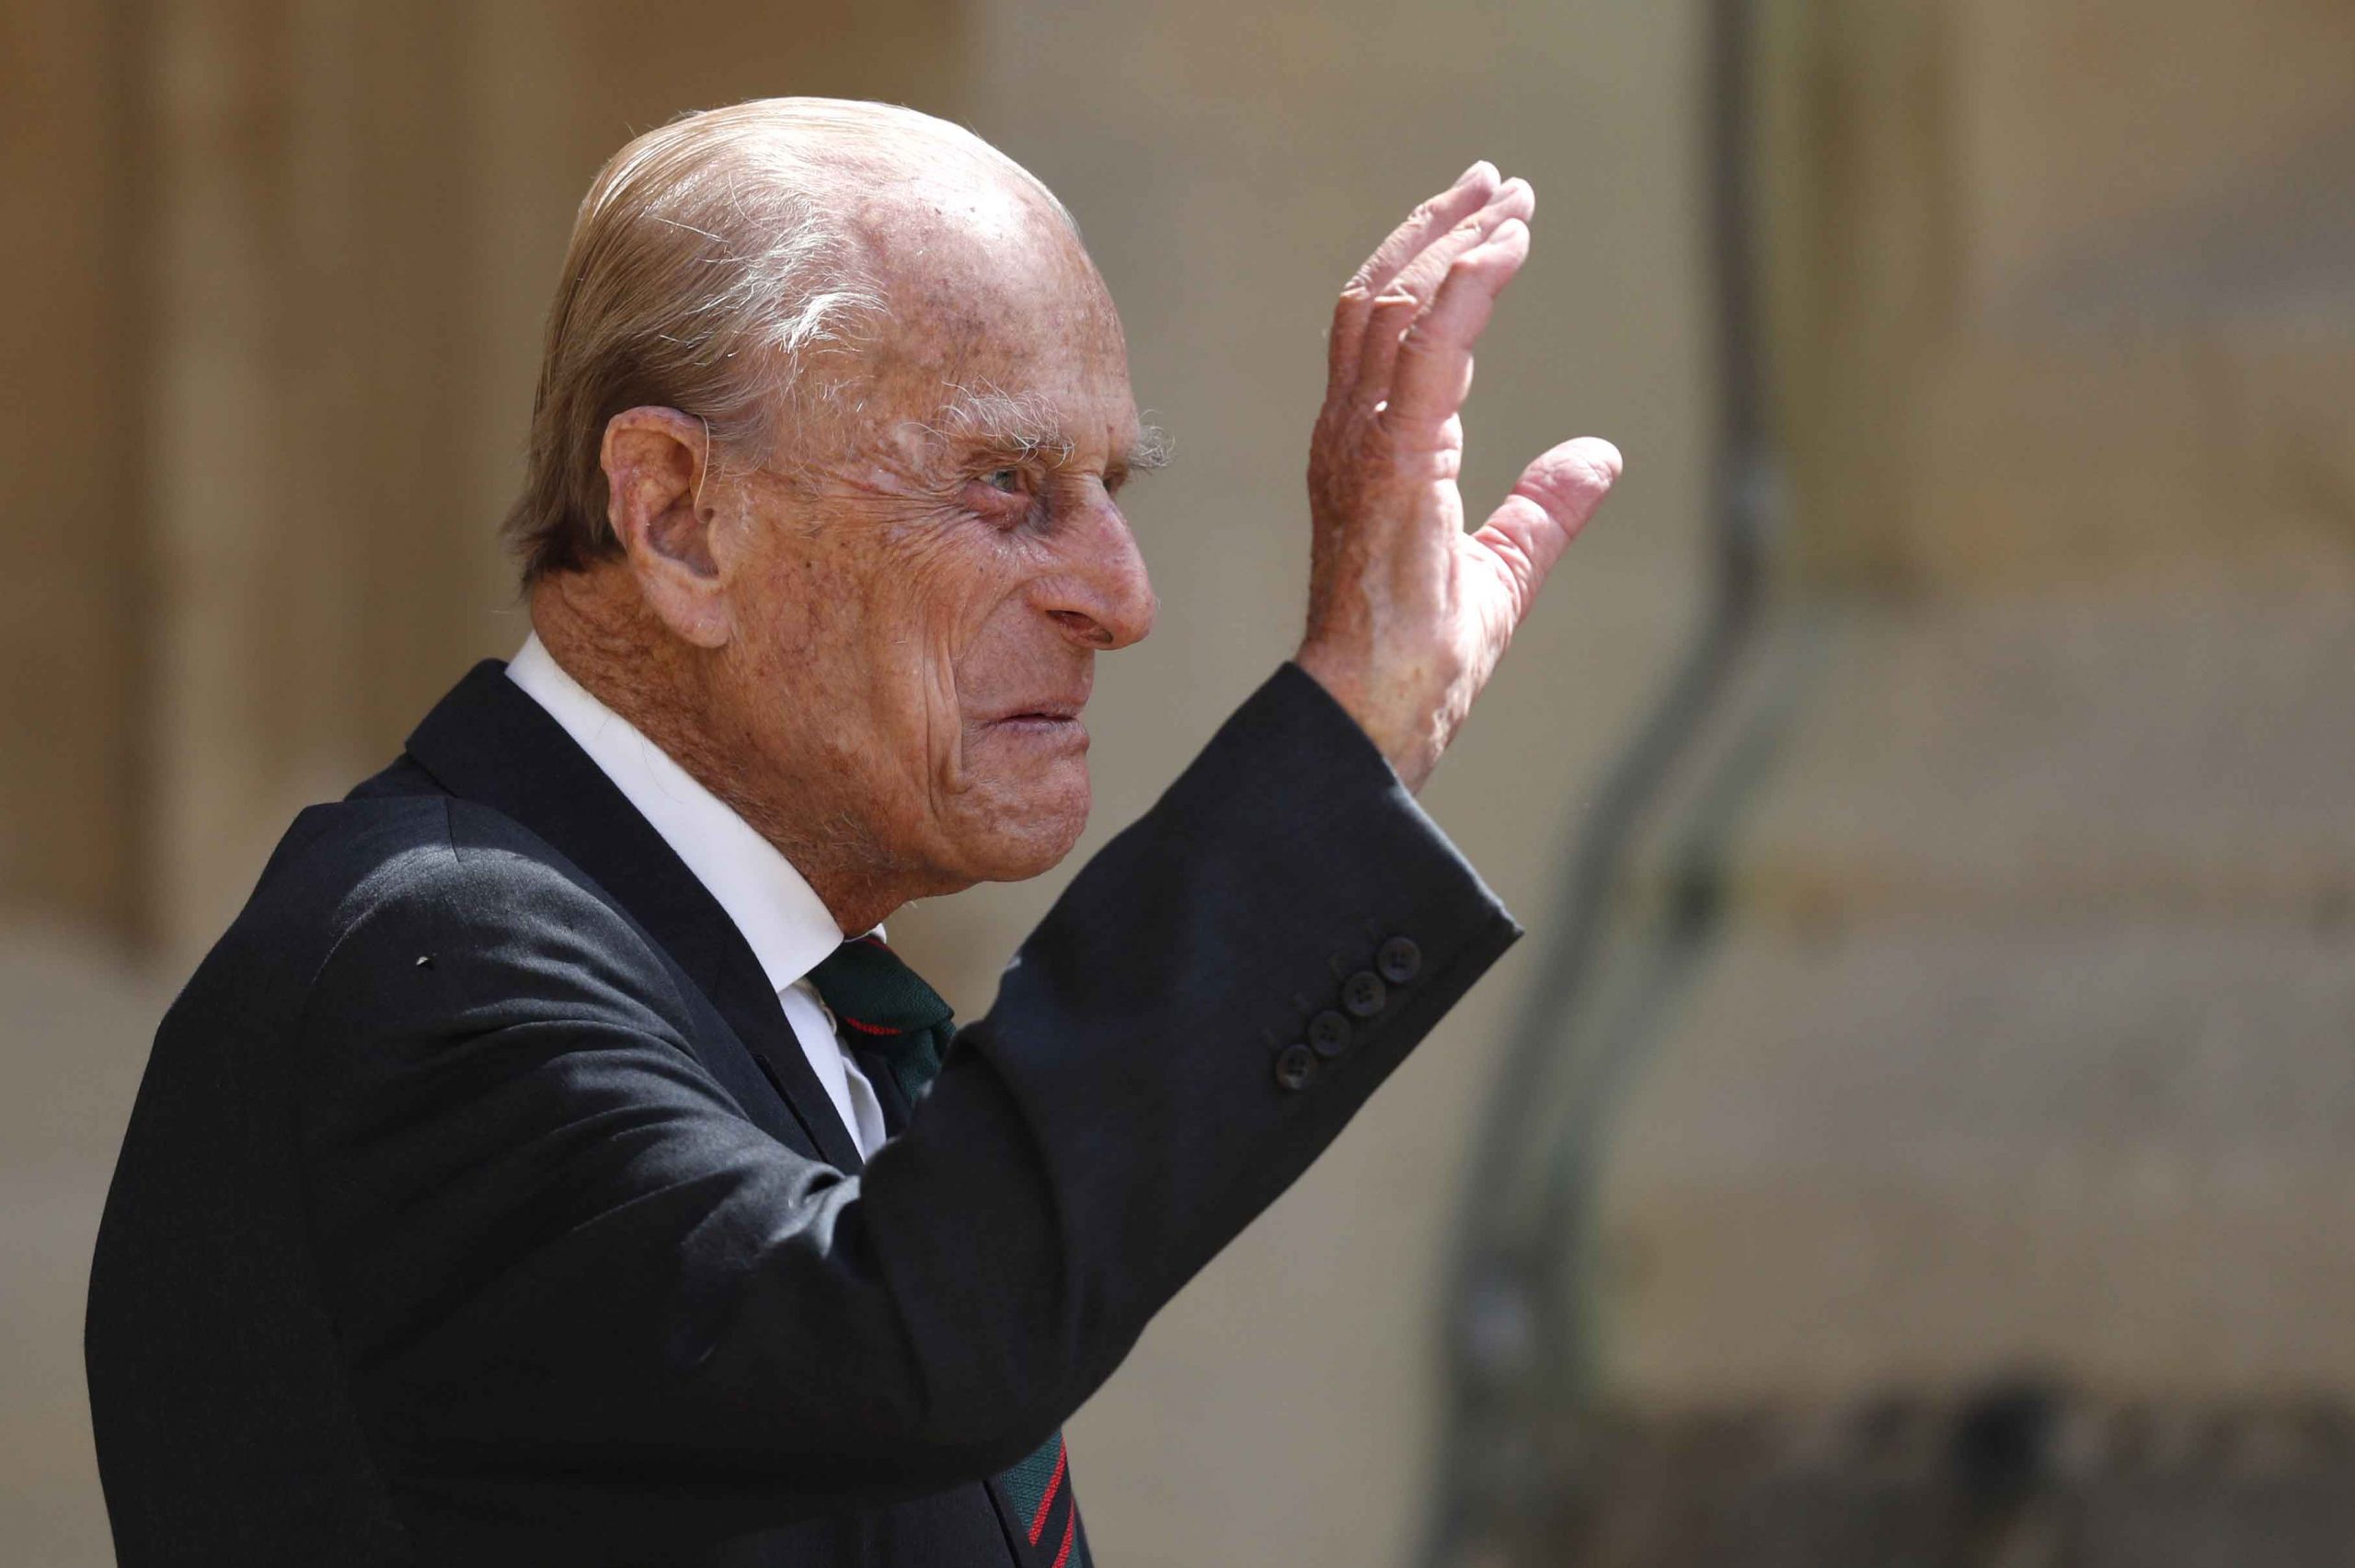 Prince Philip, 99, admitted to hospital